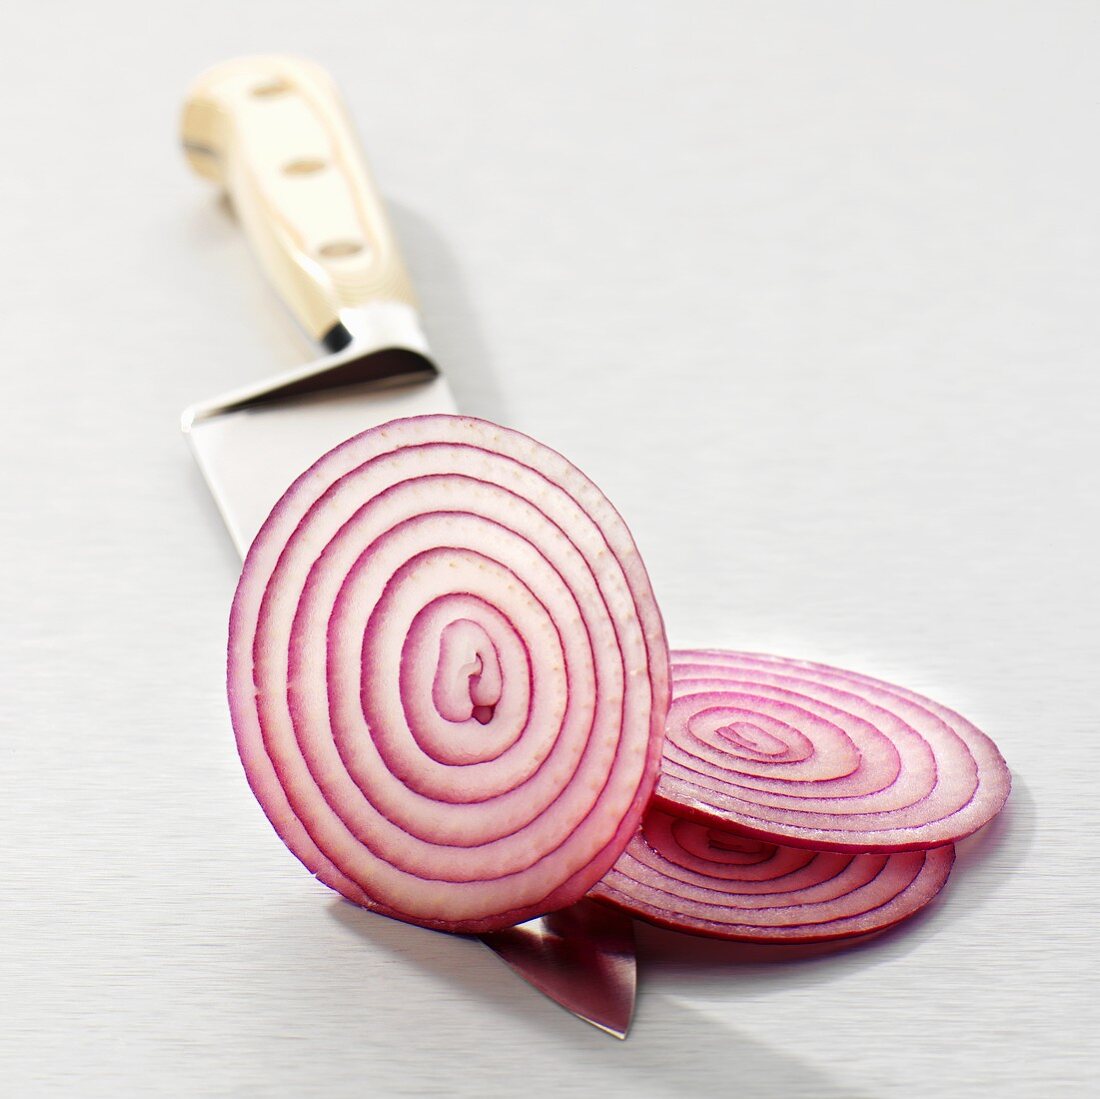 Slices of red onion on a knife